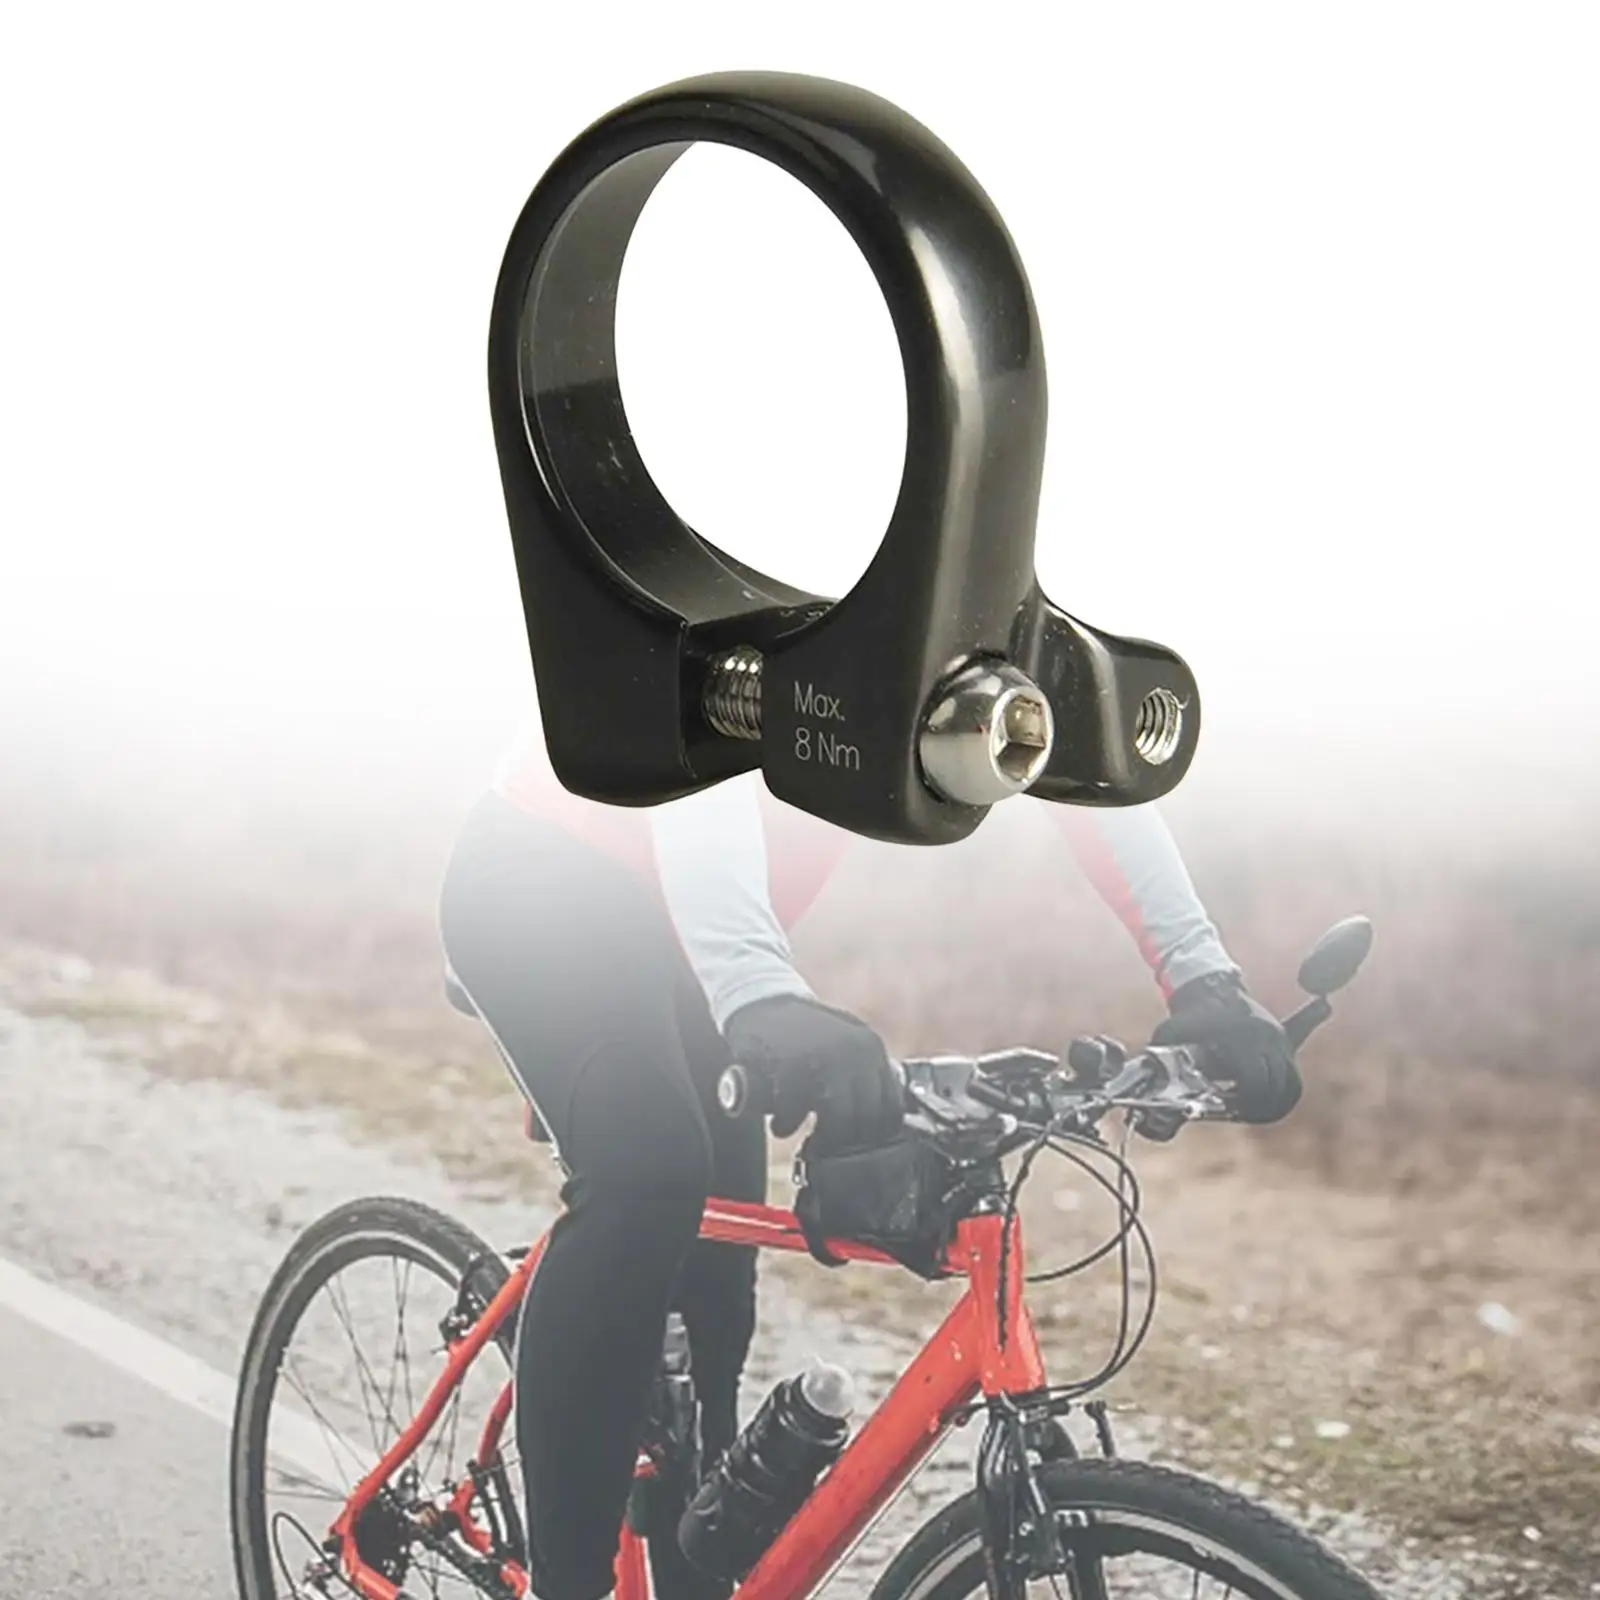 Bike Rear Rack Mount Adapter for 30.8/30.9mm Seat Post Lightweight with Screws for Road